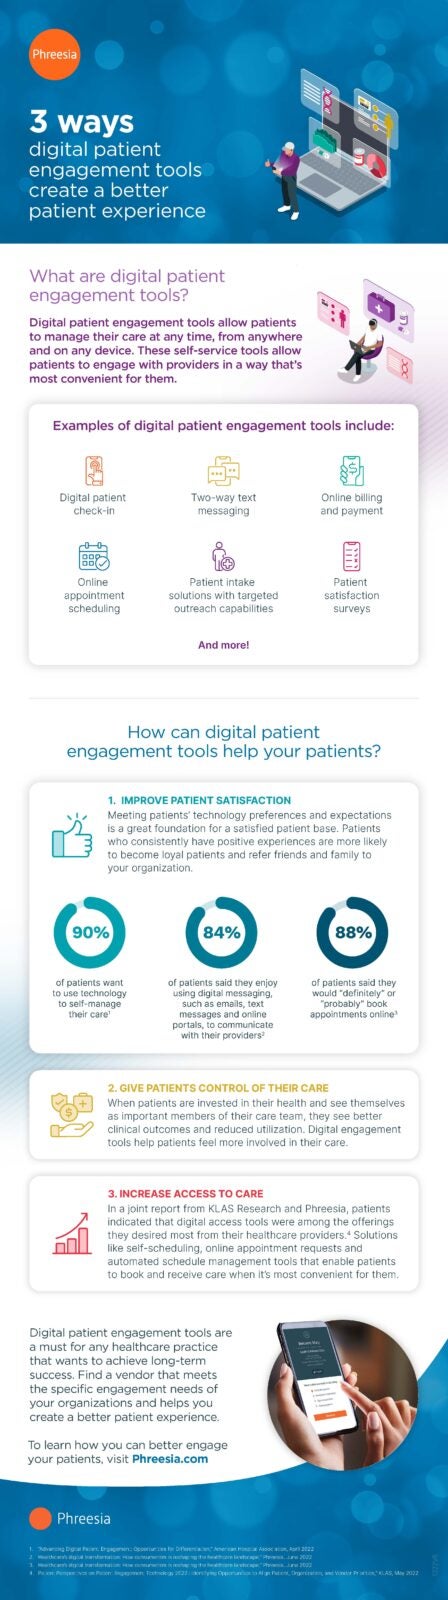 3 ways digital patient engagement tools create a better patient experience